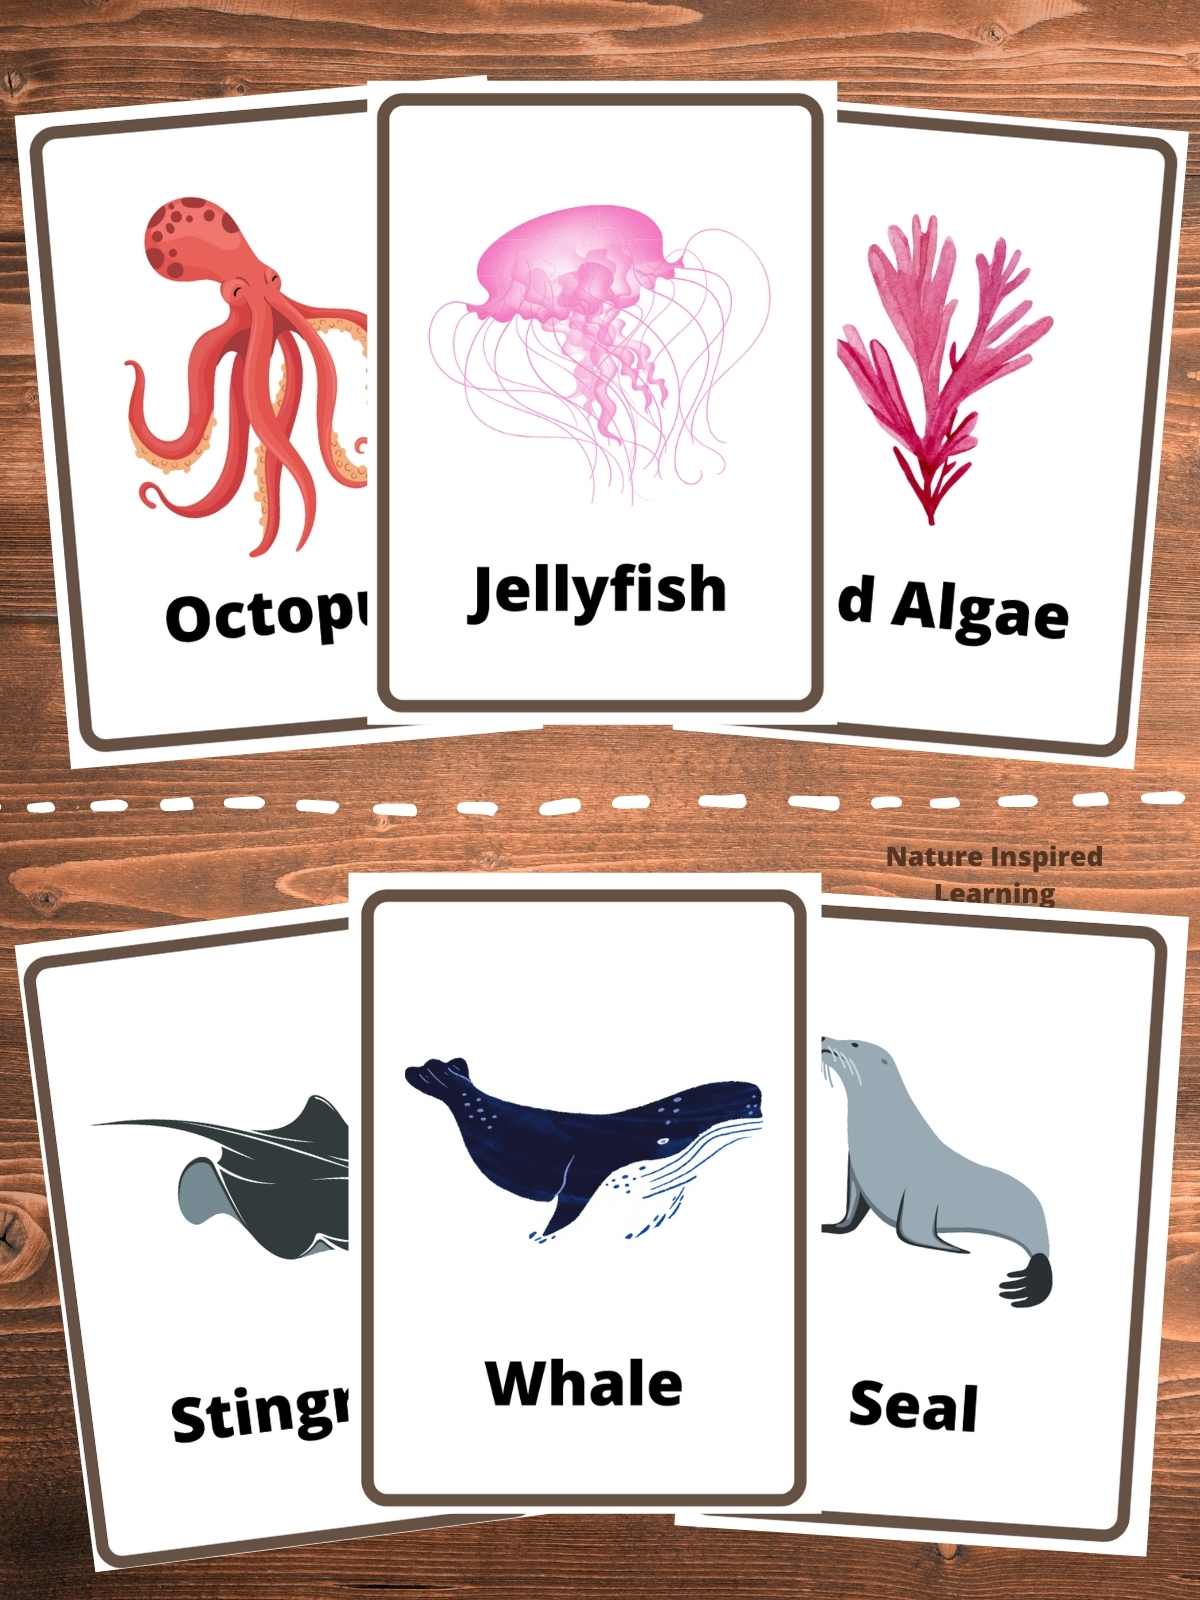 two groups of flashcards one with a red octopus, pink jellyfish, and red algae above a group with a grey stingray, blue whale, and grey seal. Two groups divided by a white dashed line on a wooden background